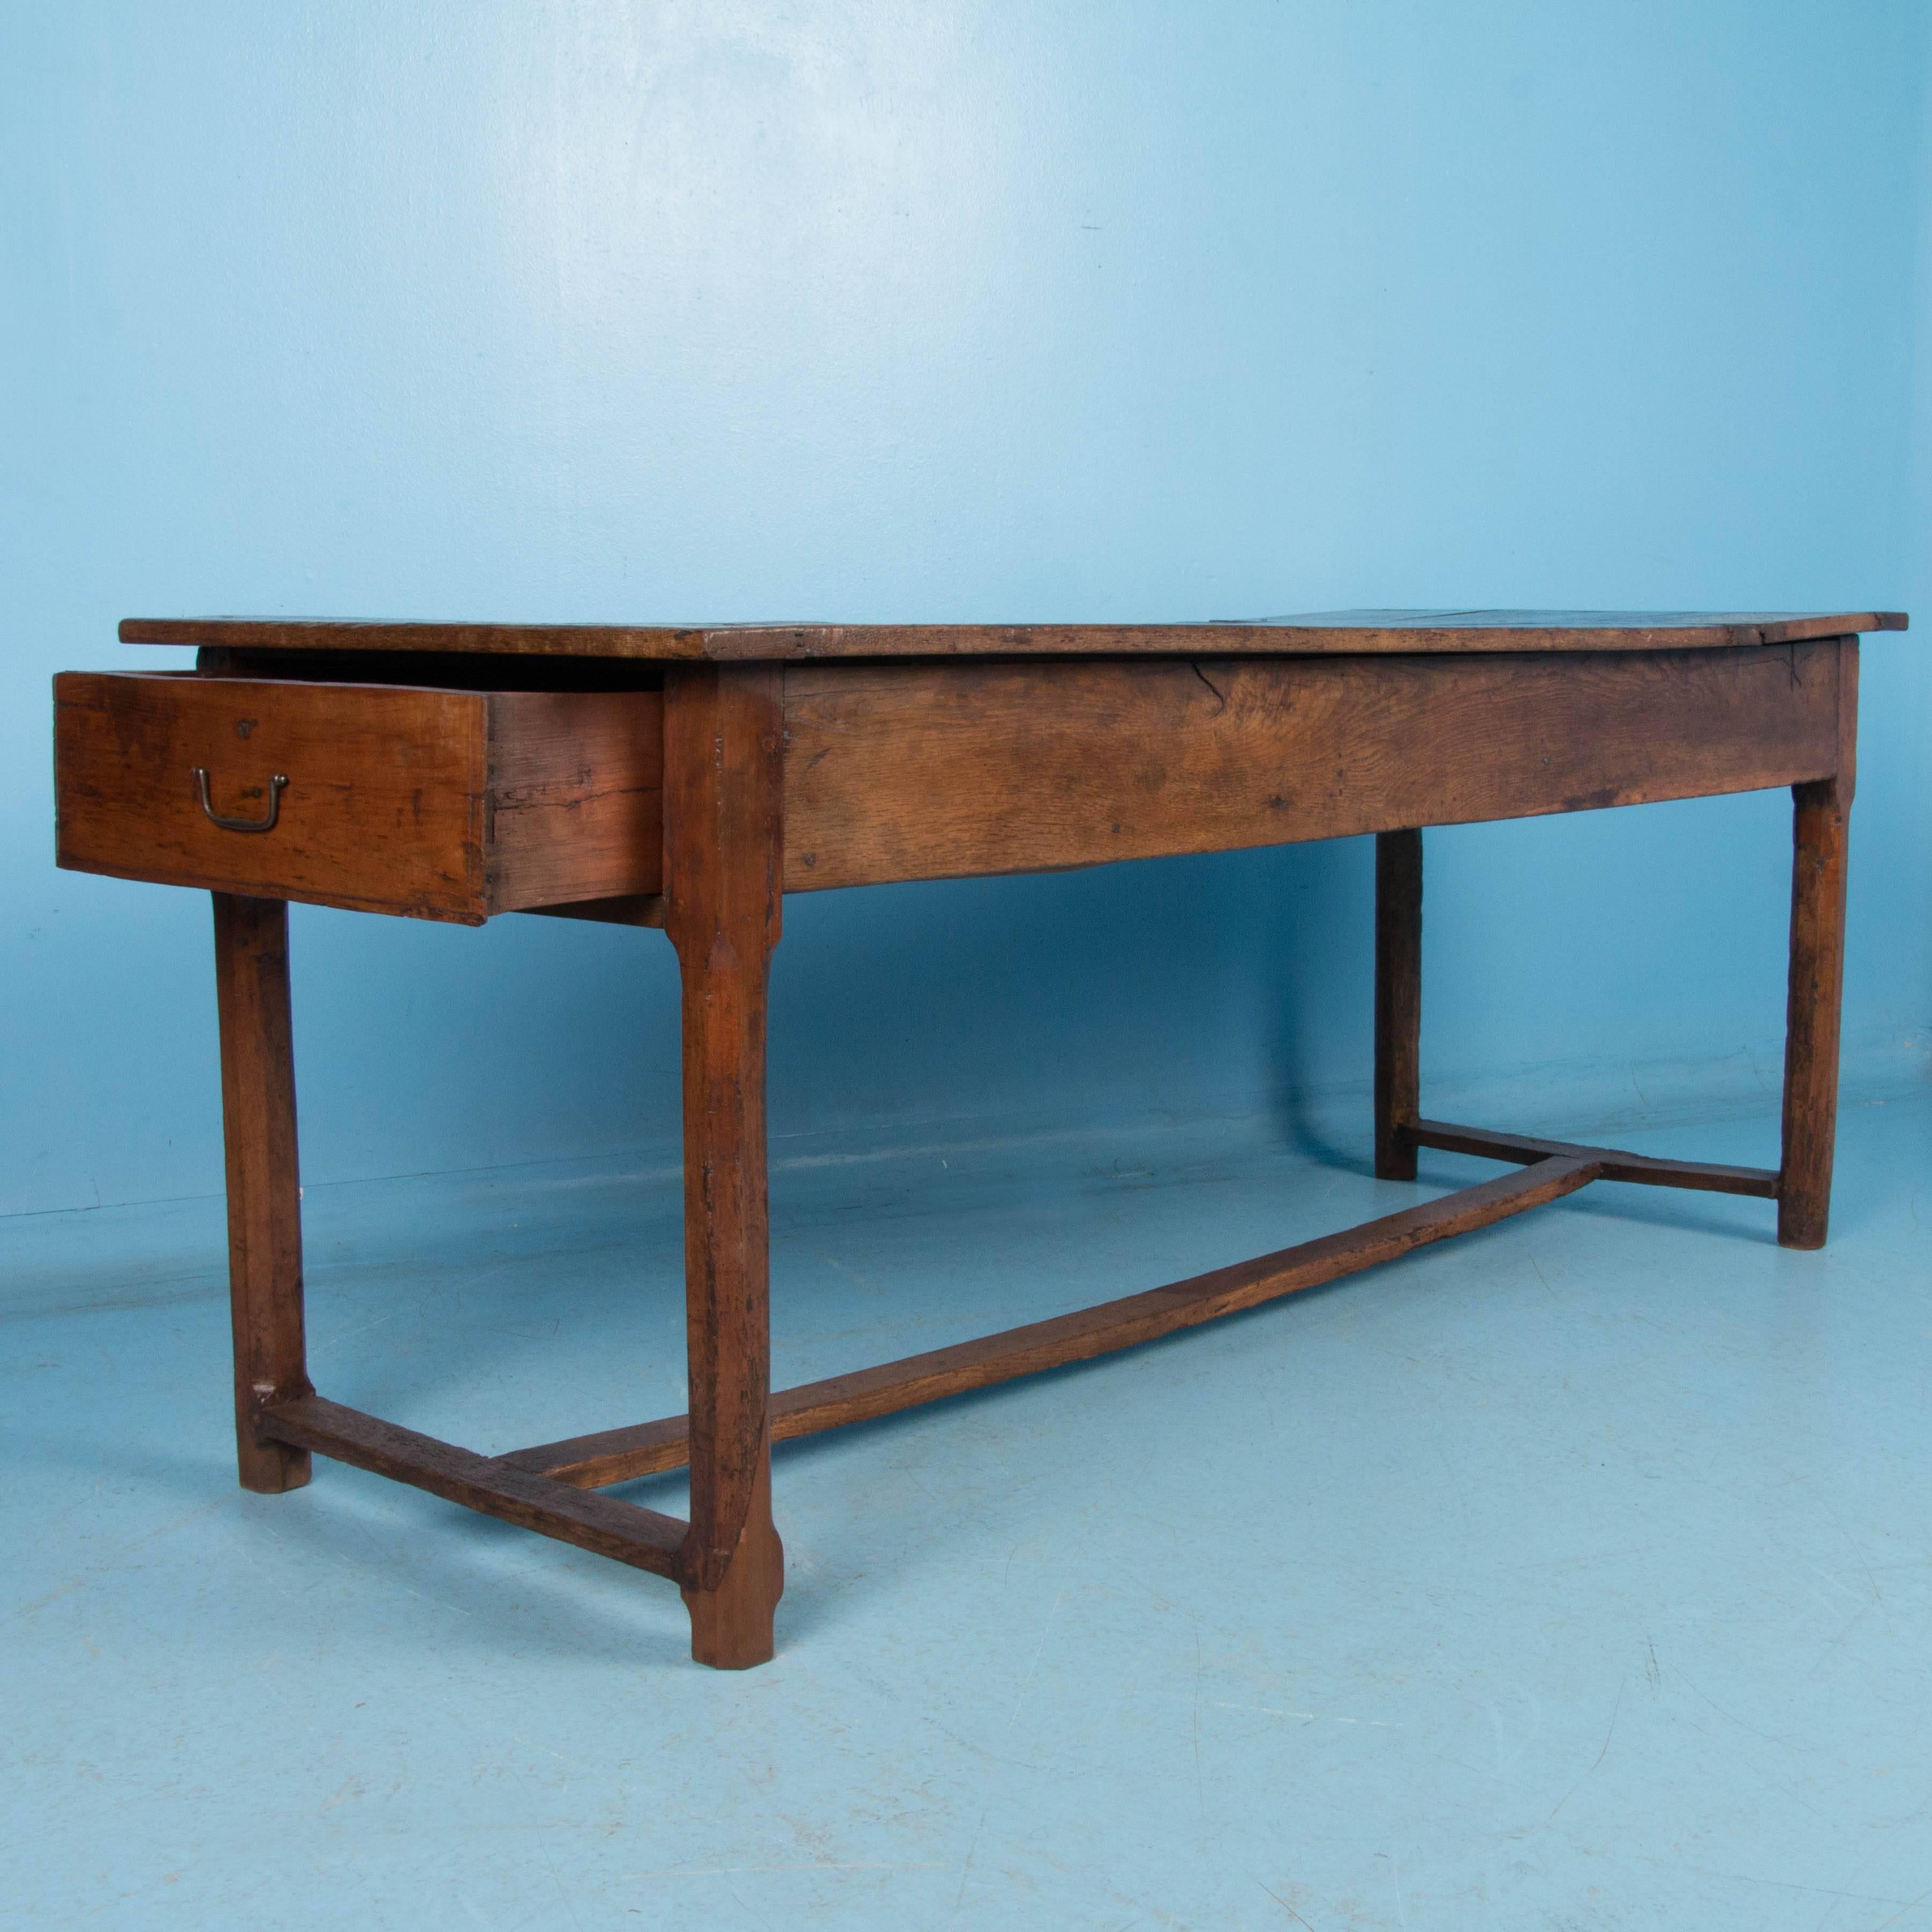 The rich color along with the aged texture of the hardwood, create a remarkable patina that is all original in this farm table. An unusual feature of the table is a hinged section on the top that lifts to expose a large storage space underneath. It